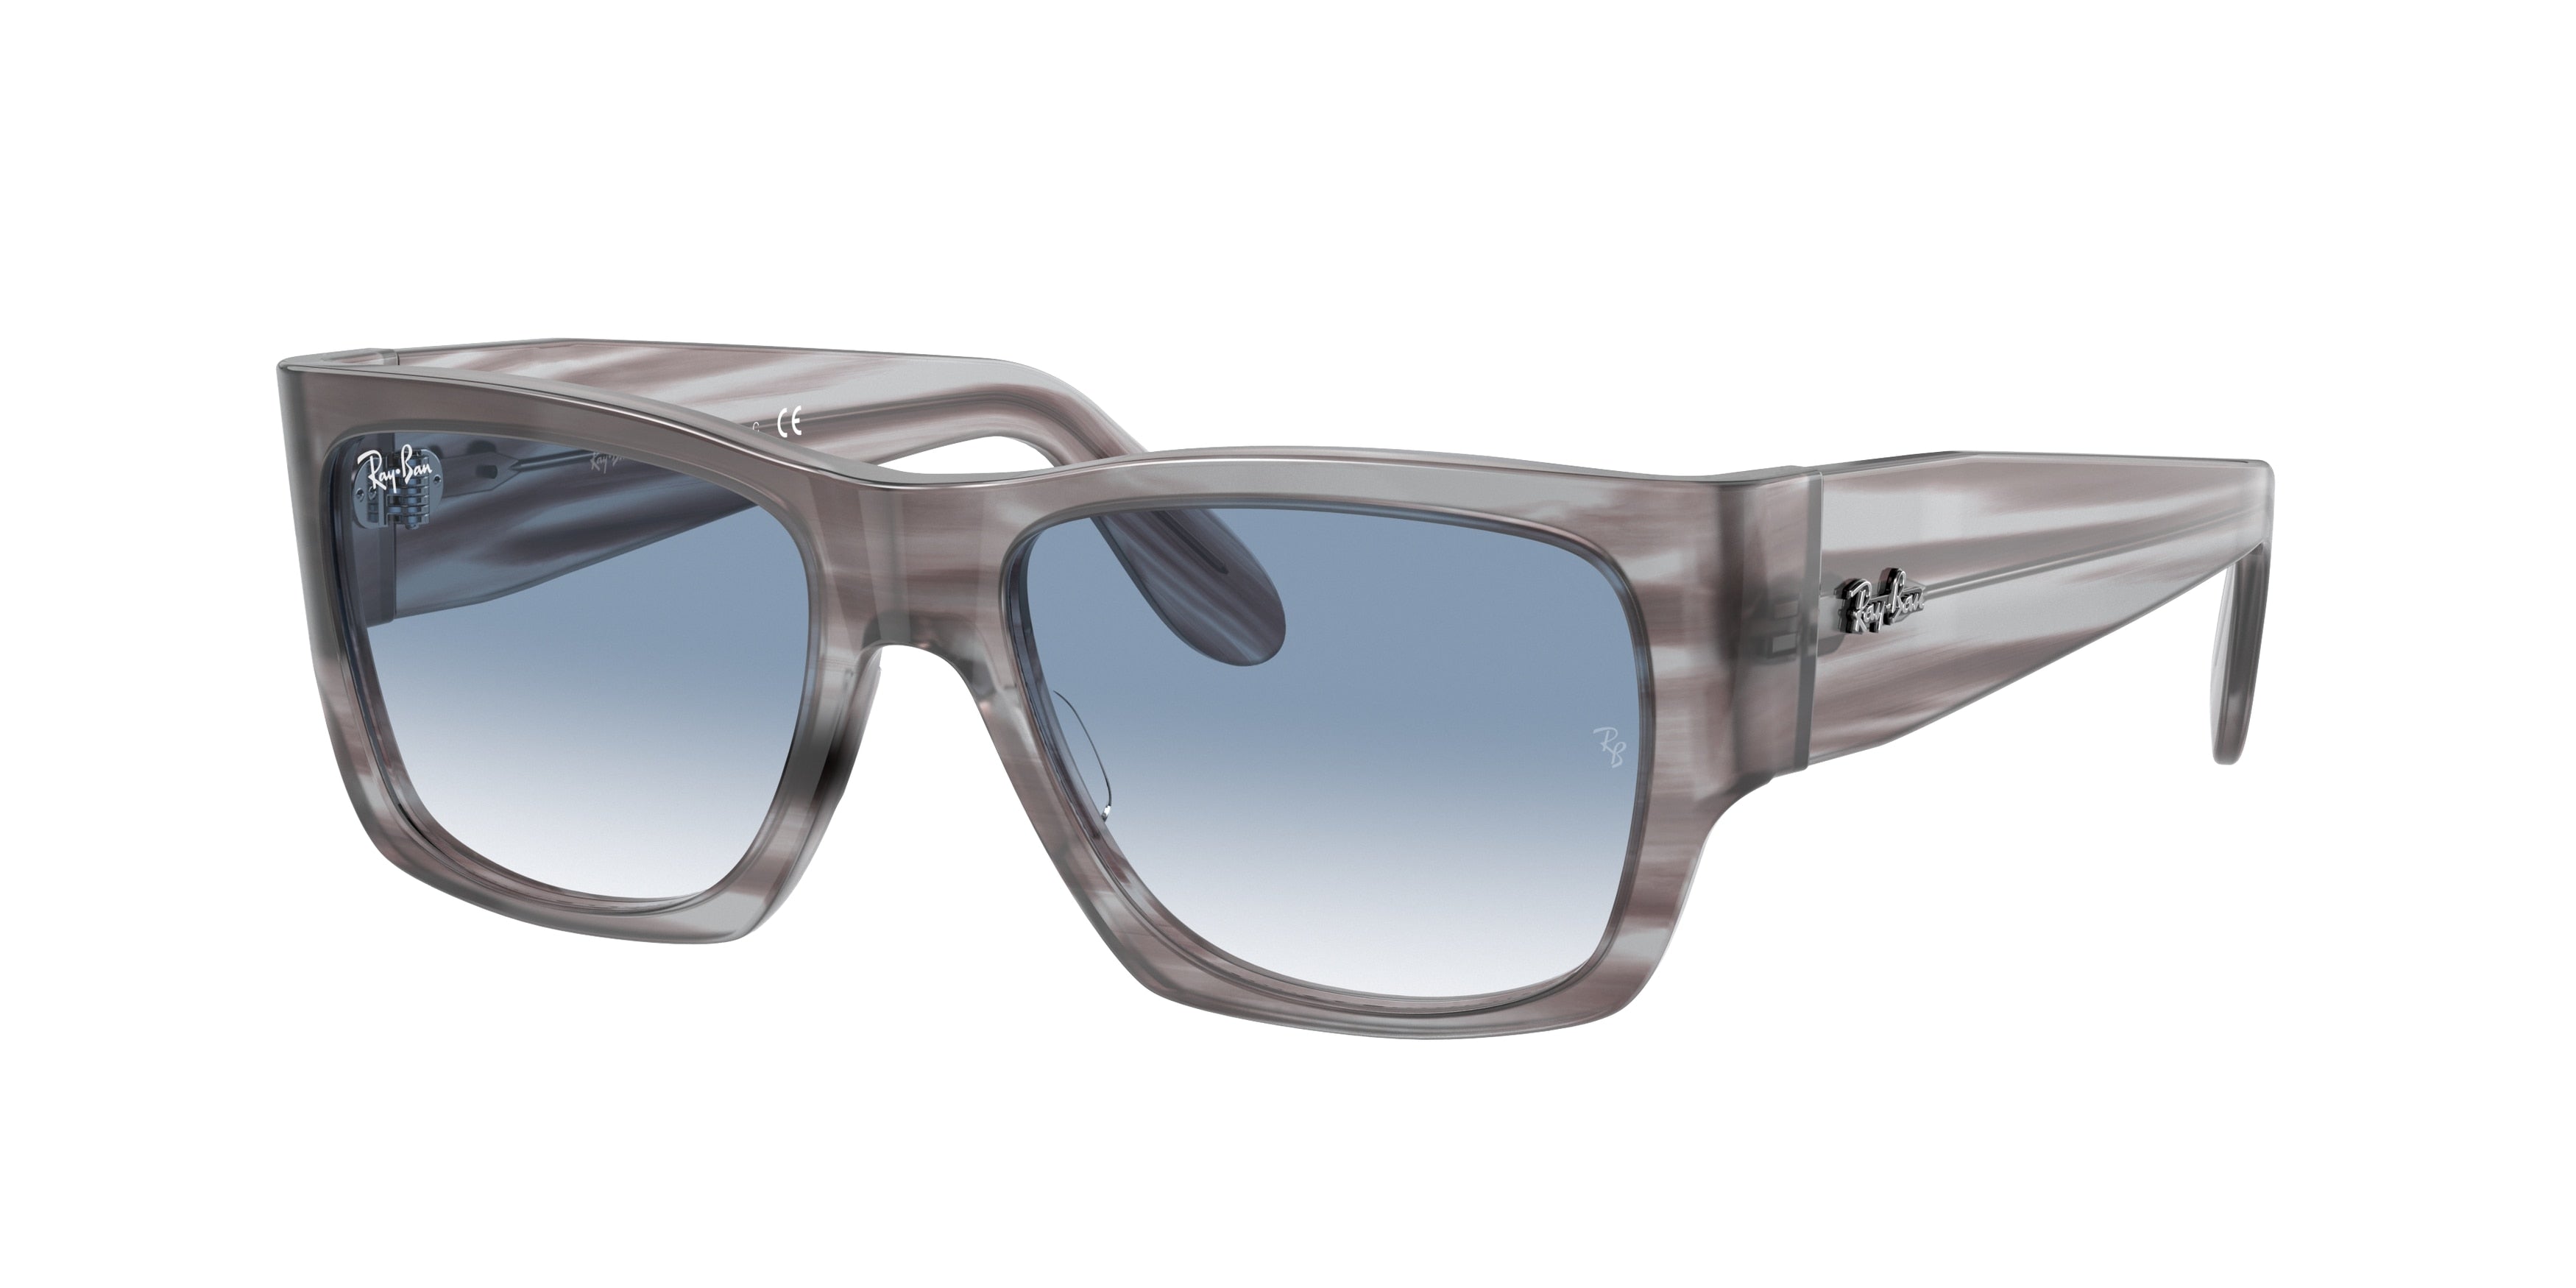 Ray-Ban WAYFARER NOMAD RB2187 Square Sunglasses  13143F-Striped Grey 54-140-17 - Color Map Grey